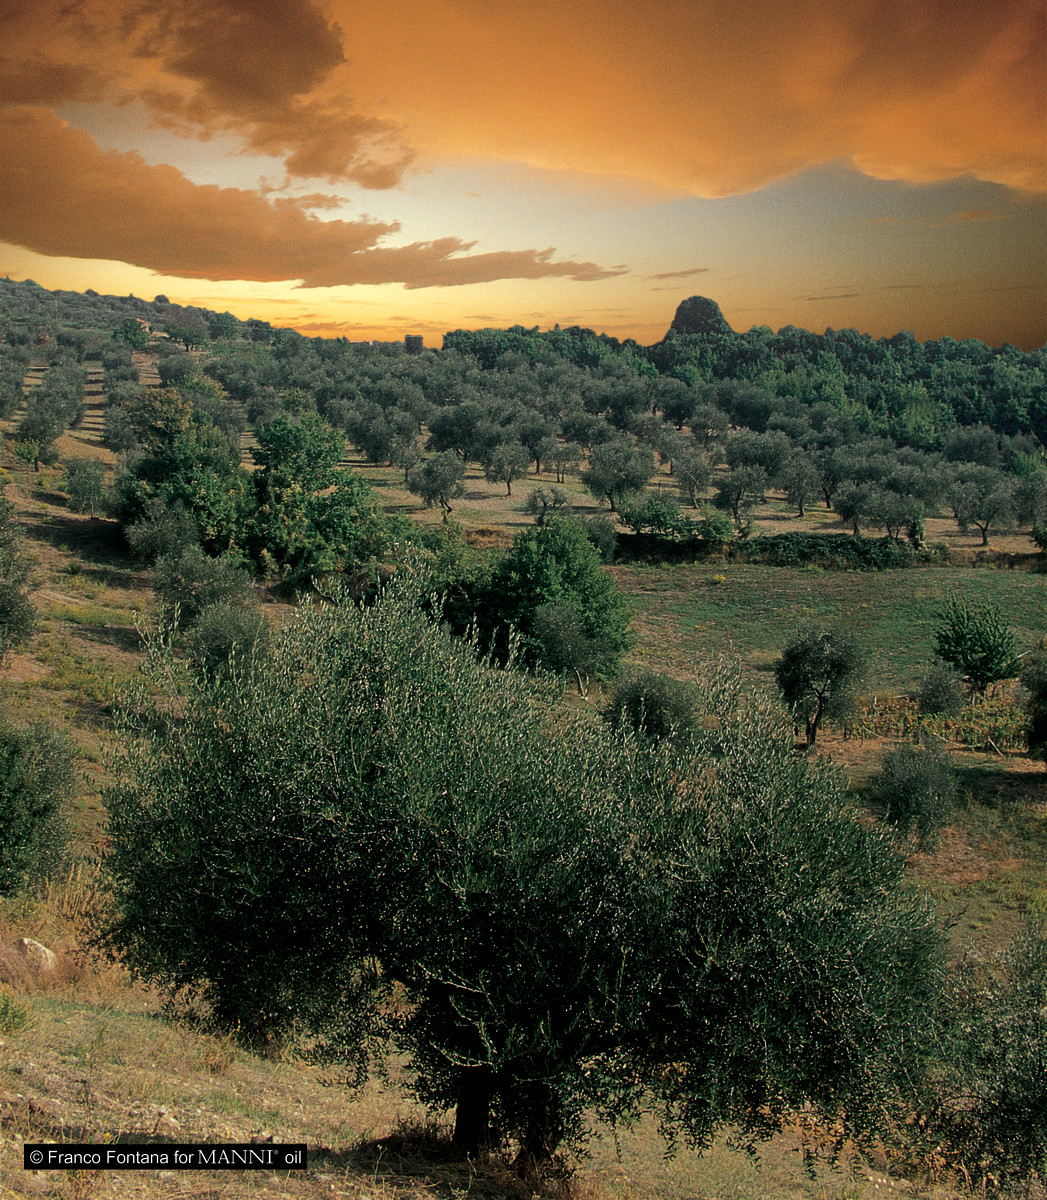 Manni olive tree groves in Tuscany Italy.